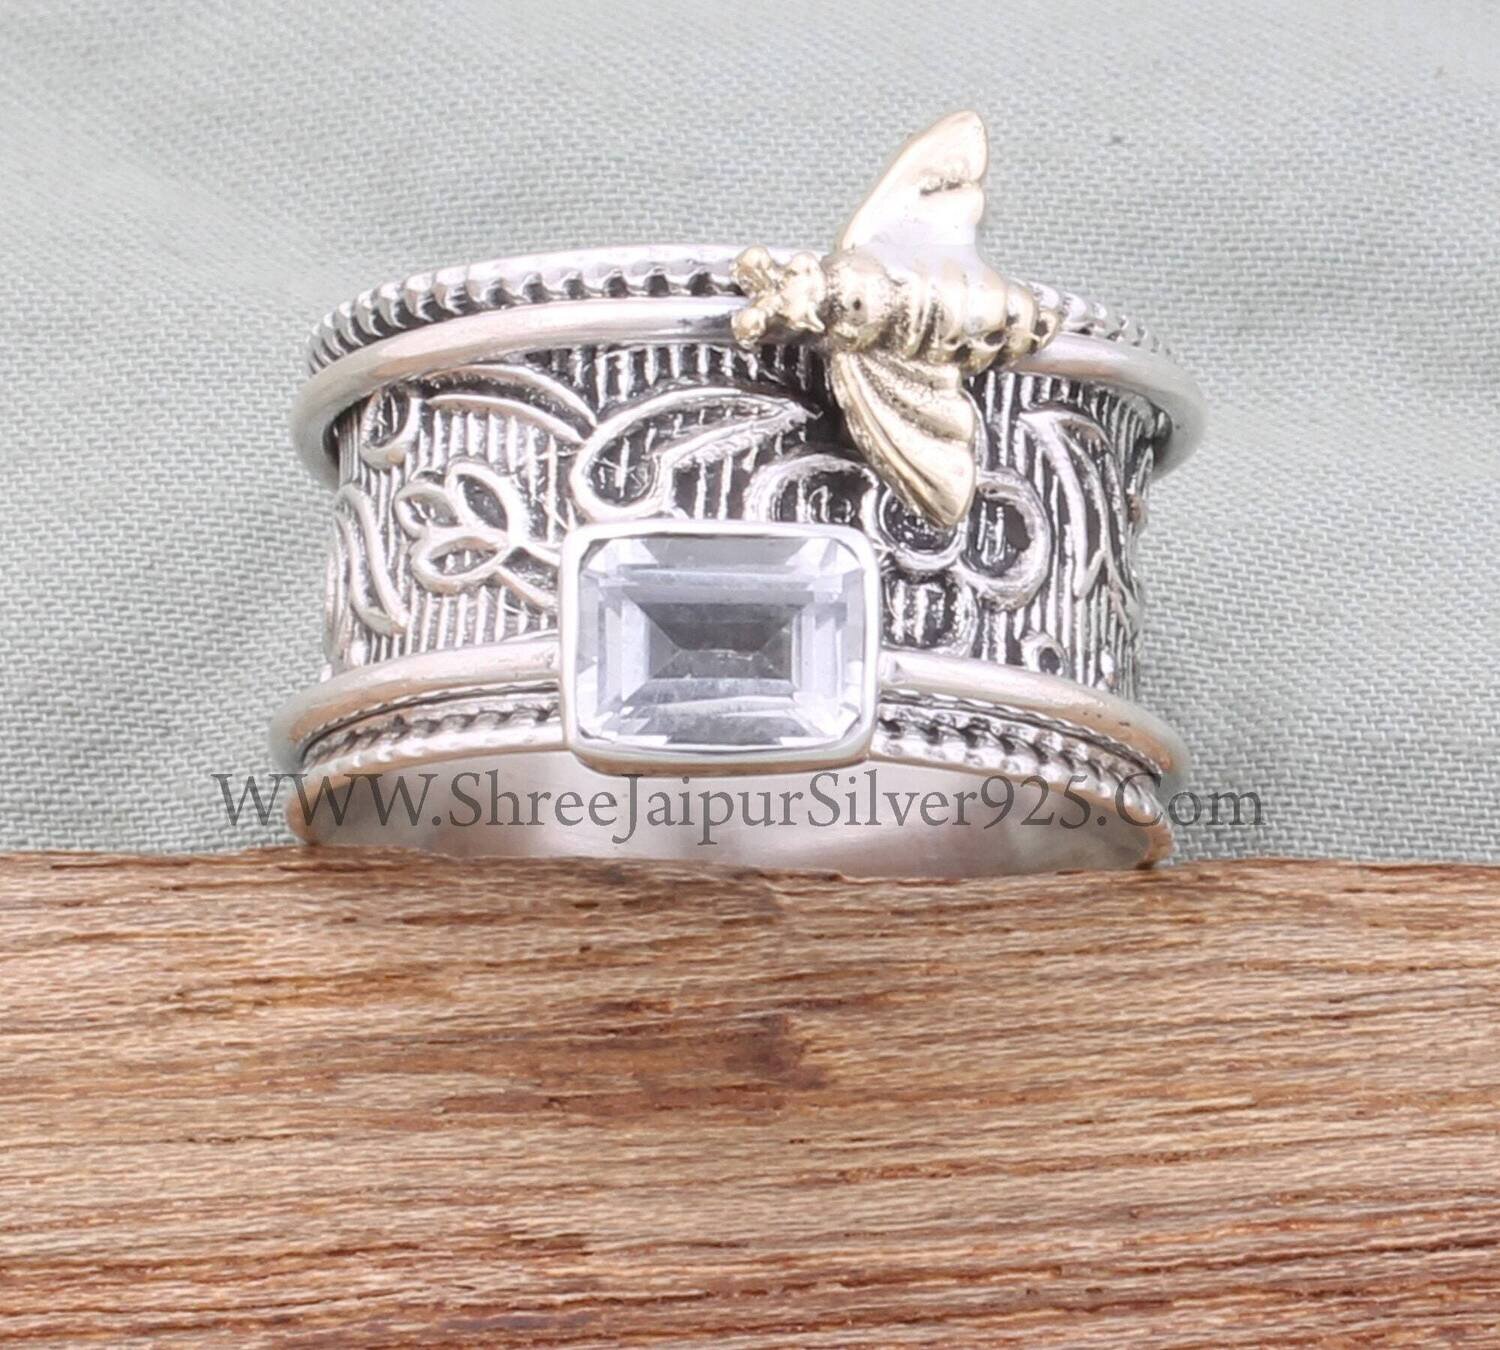 925 Sterling Silver & Brass Crystal Quartz Spinner Ring, Handmade Honey Bee Engraved Wide Band Fidget Anxiety Ring Gifts For Her Anniversary